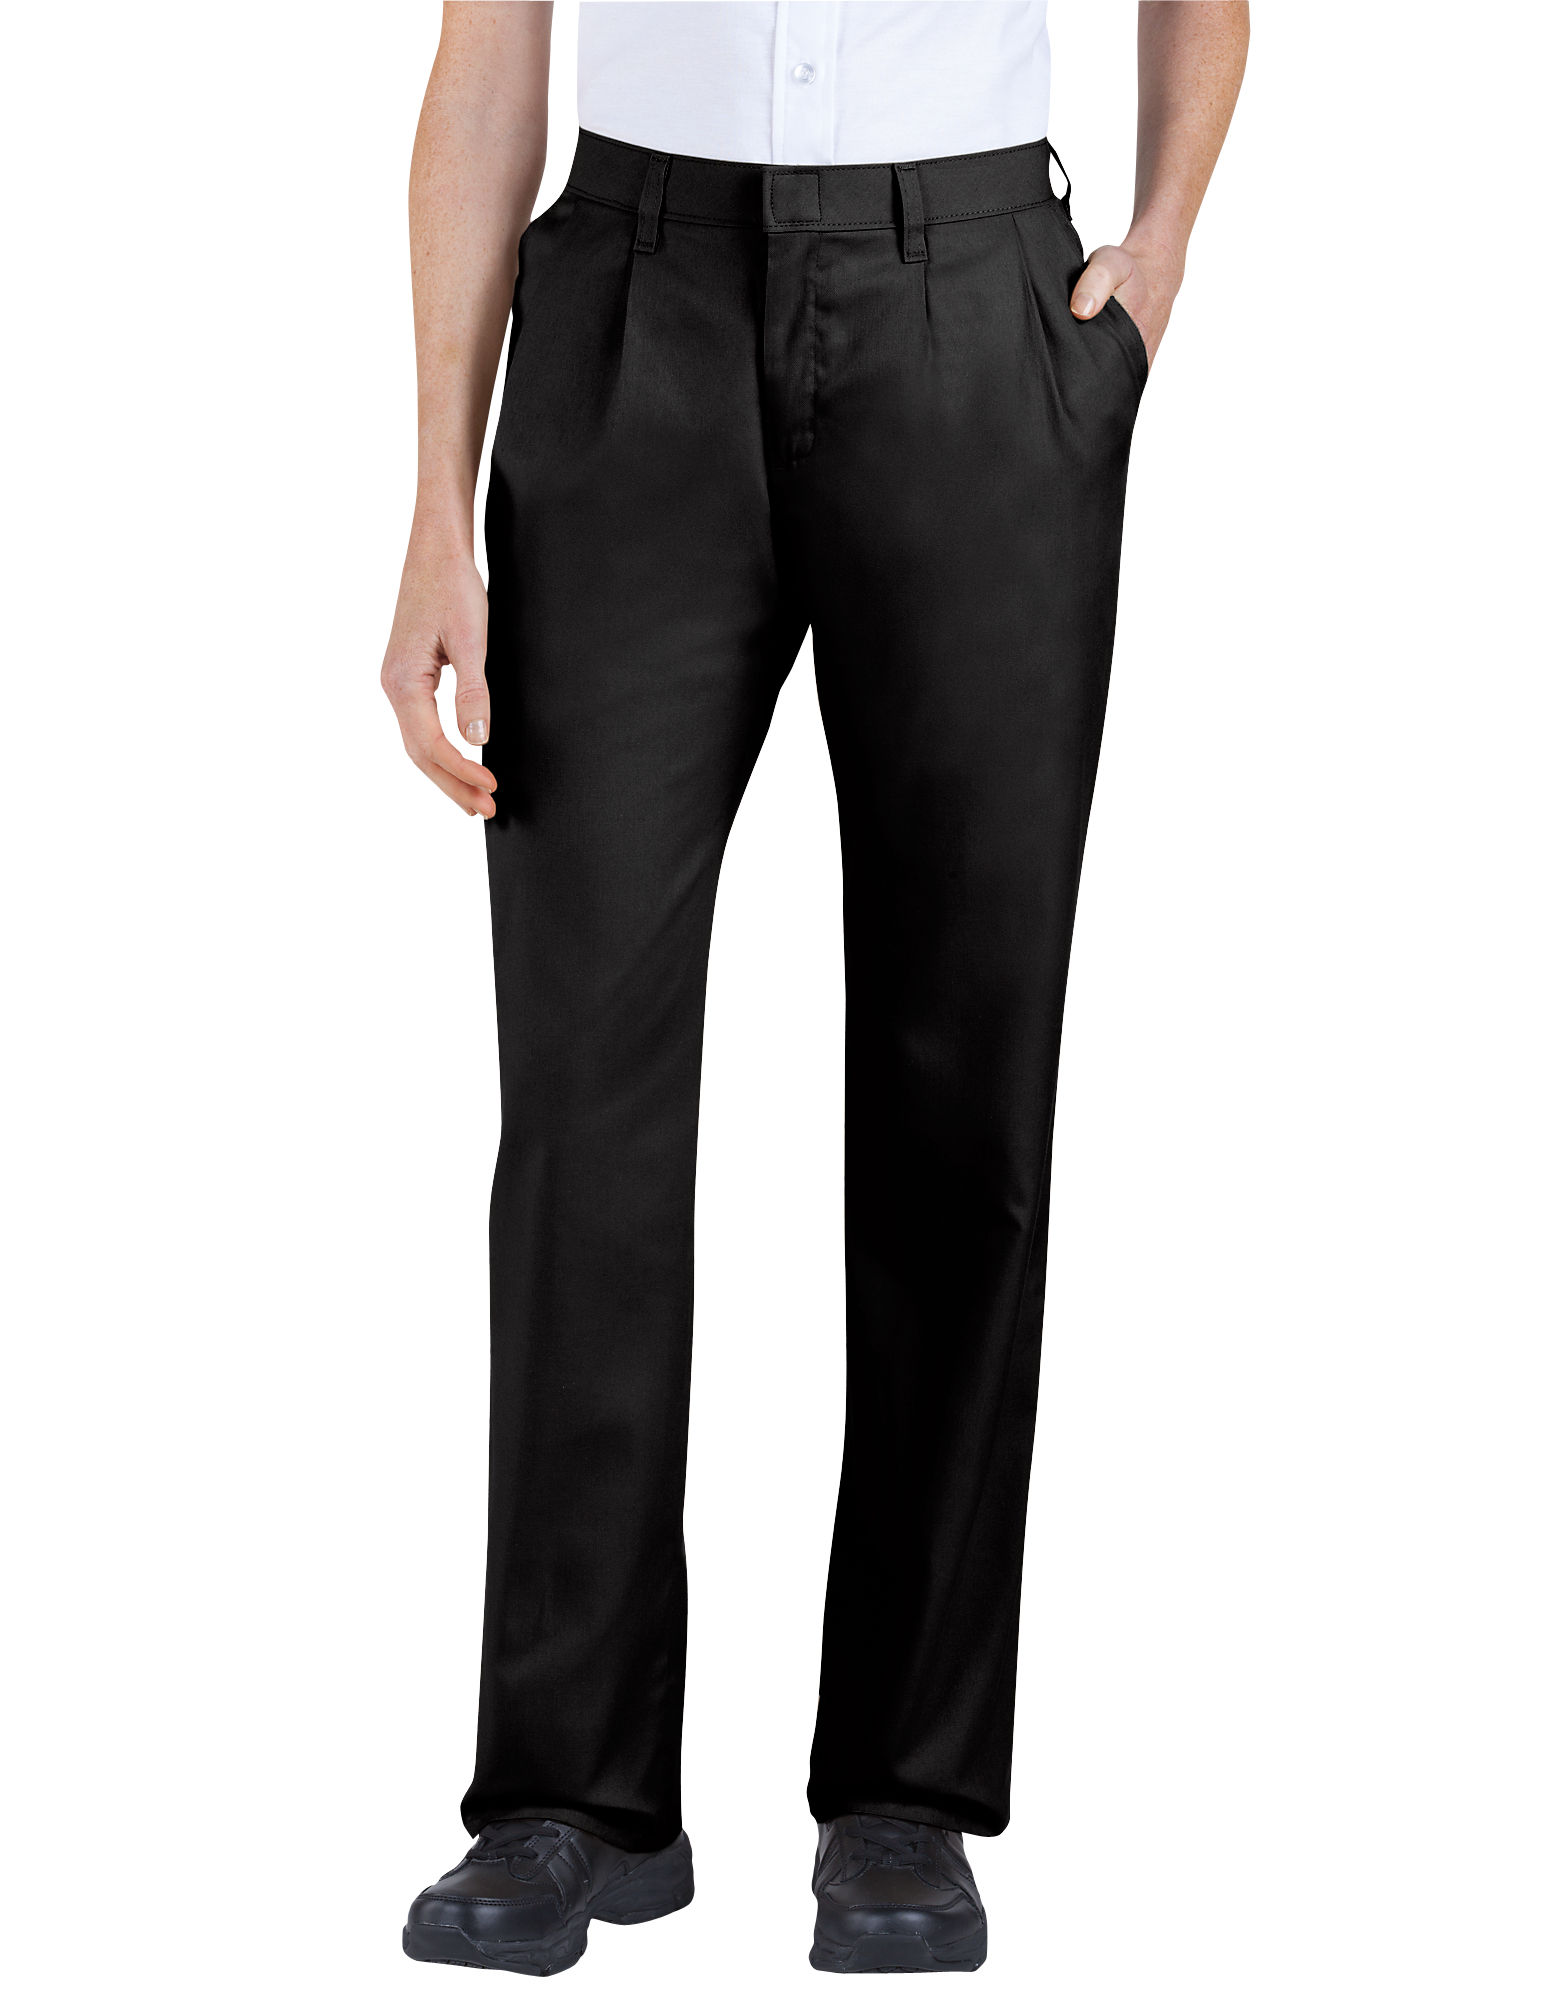 Pleated Pants Women women-s relaxed fit straight leg pleated front pants - black ... OFUGKNX